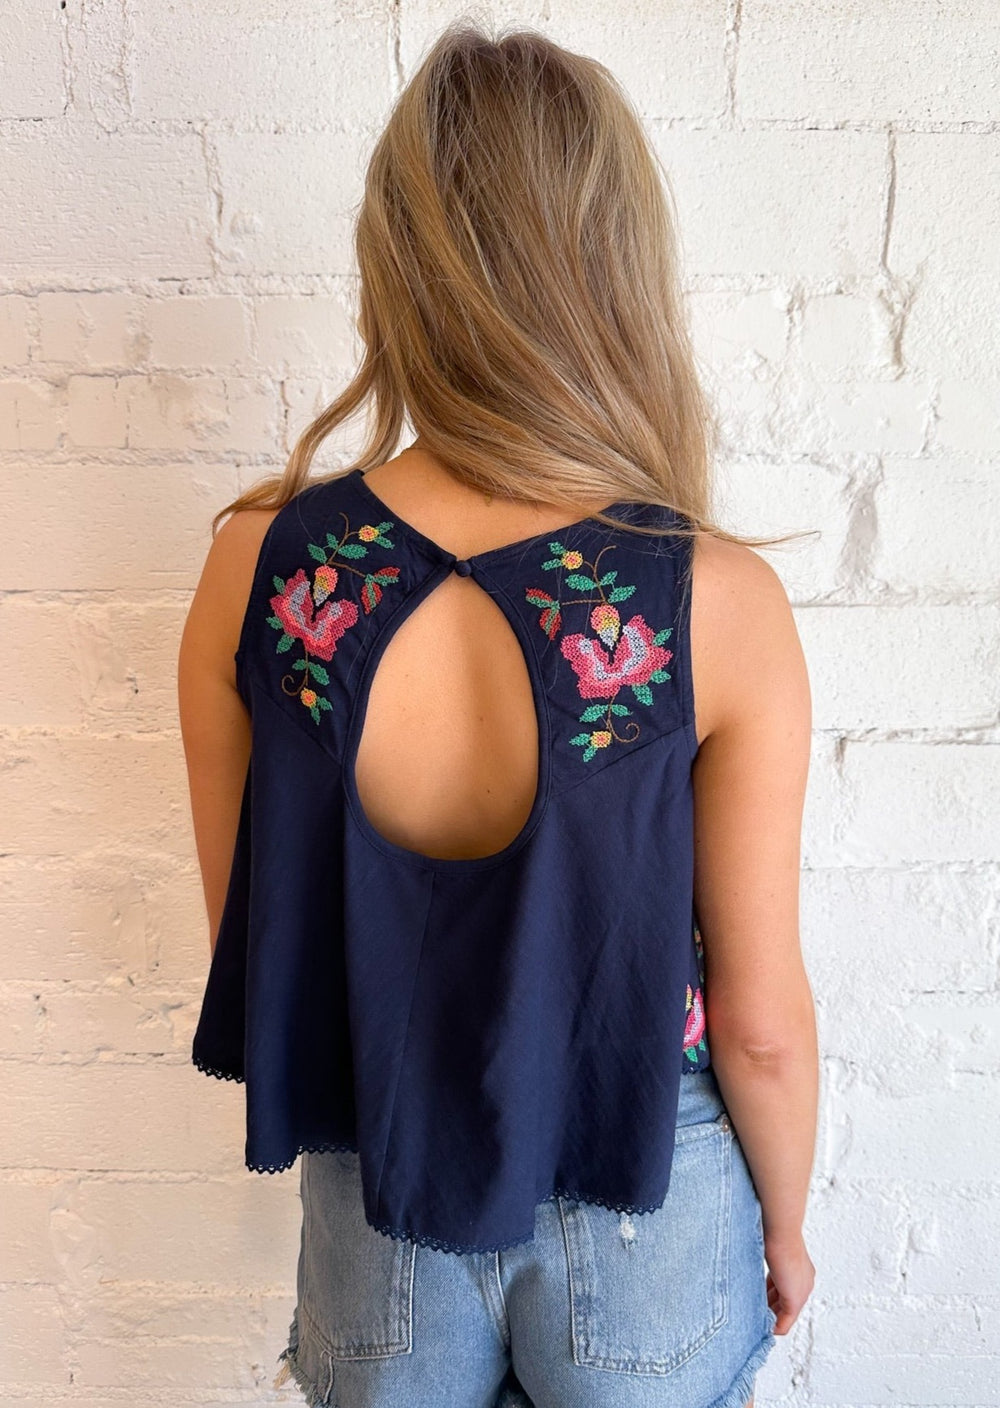 Free People Fun & Flirty Embroidered Top, Tops, Free People, Adeline, dallas boutique, dallas texas, texas boutique, women's boutique dallas, adeline boutique, dallas boutique, trendy boutique, affordable boutique